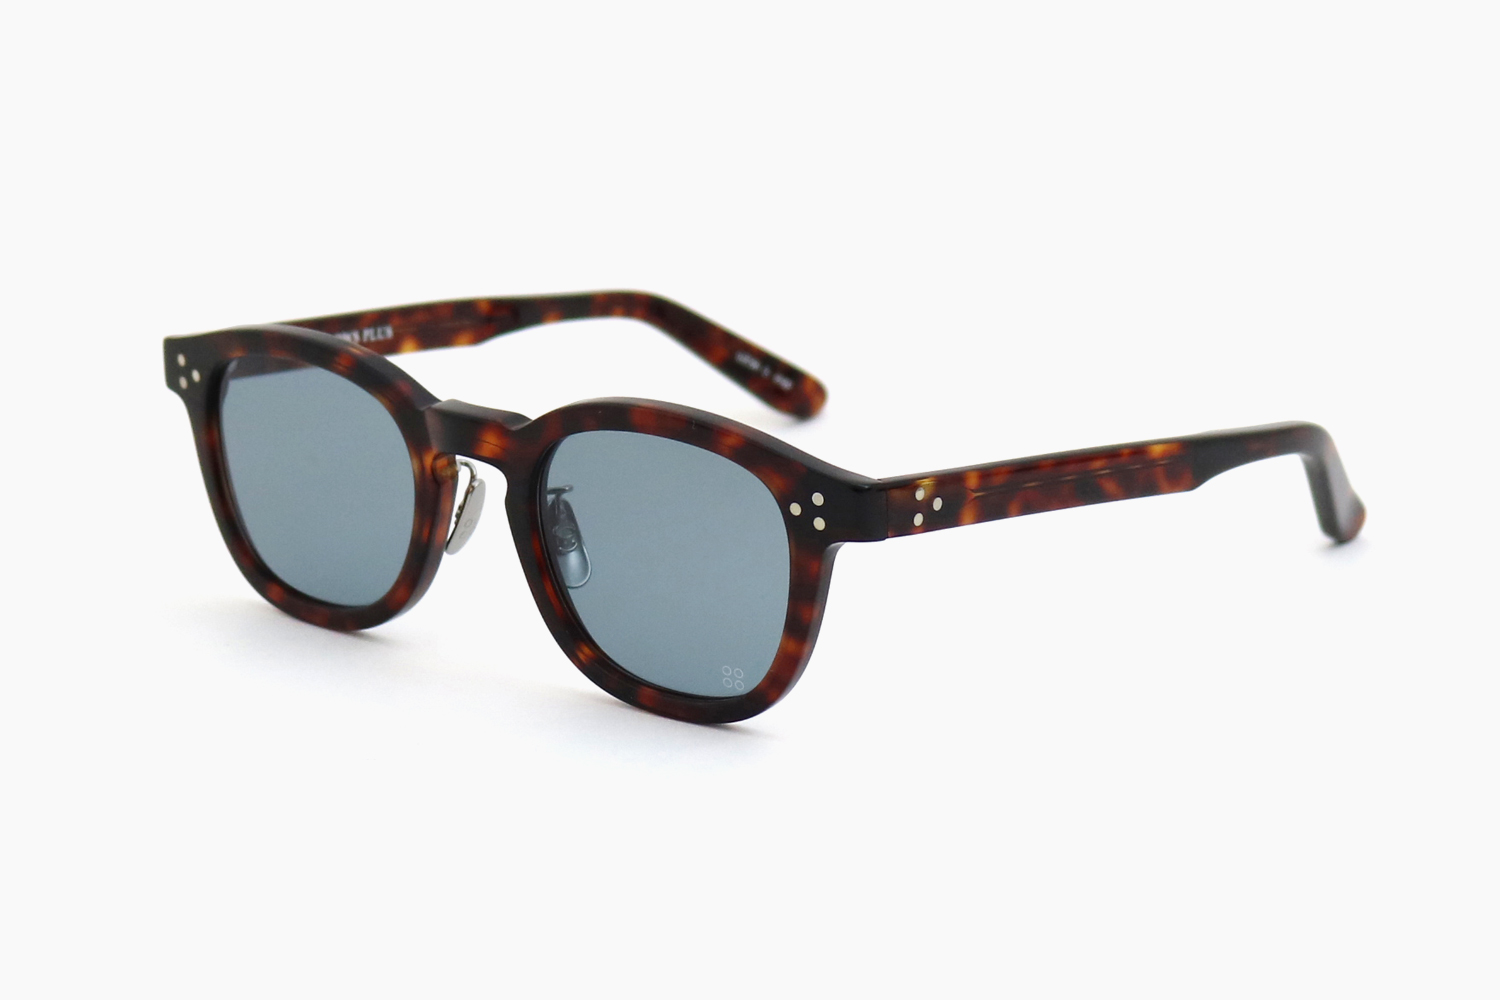 LEON - 432｜＊SUNGLASSES COLLECTION - 2022 SPRING & SUMMER